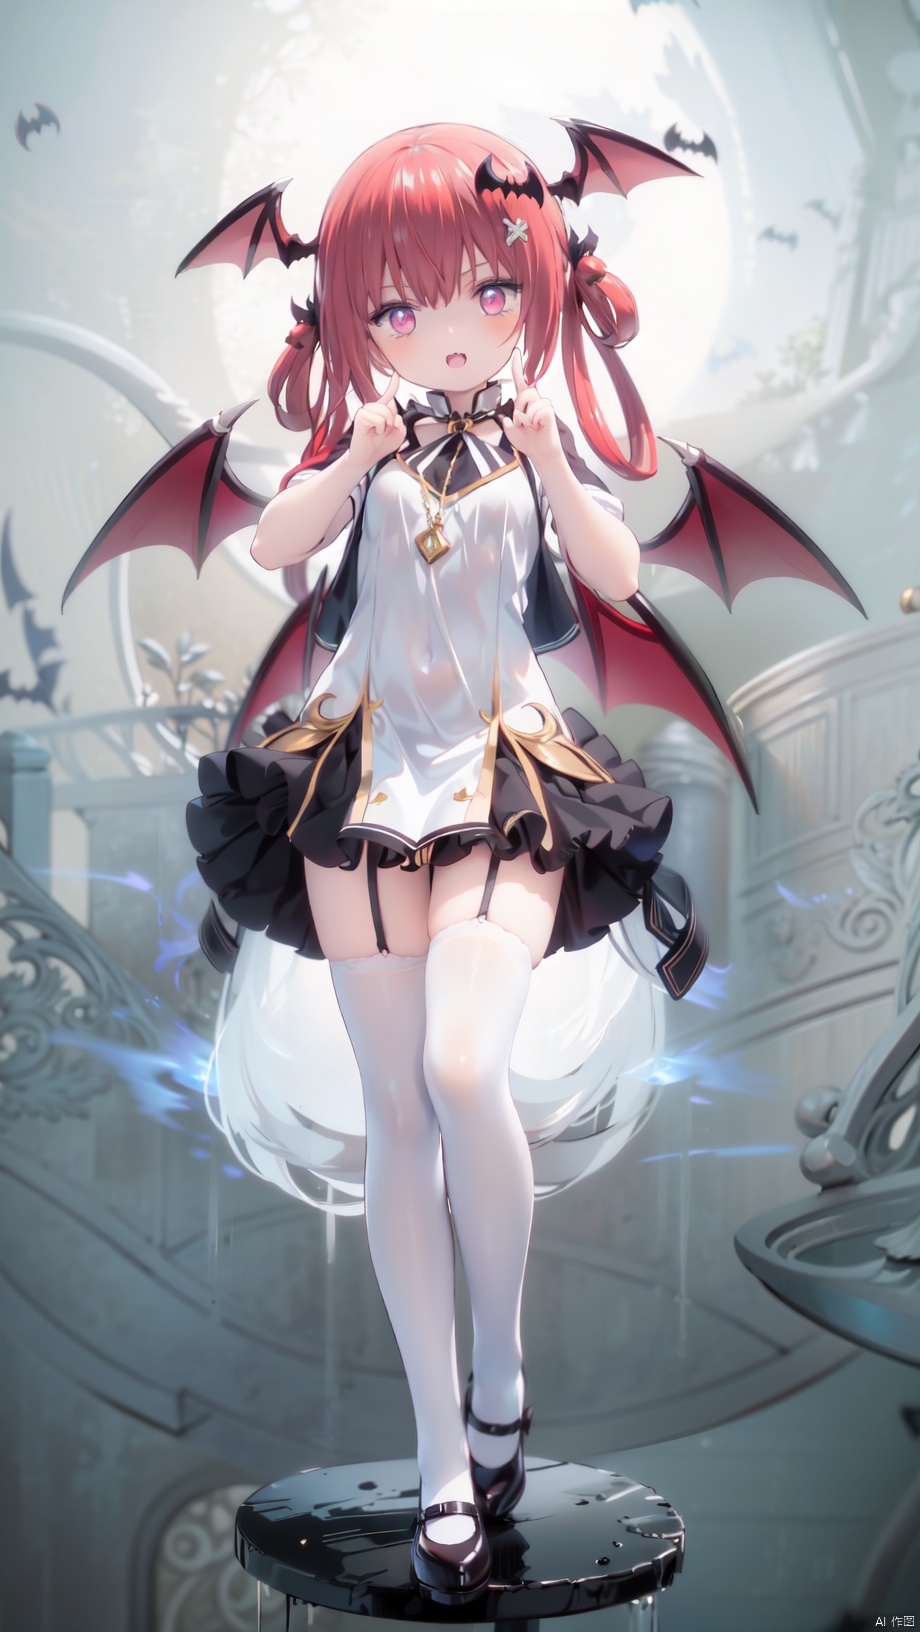 card background, Satanichia Kurumizawa Mcdowell,loli,beautiful detailed girl,narrow waist,very small breasts,Glowing skin,Delicate cute face,demon horns,bat wings,fine fabric emphasis,ornate clothes,red eyes eyes,beautiful detailed eyes,glowing eyes,(raised eyebrow),((red hair)),((long hair,bat wings hair ornament)),Glowing hair,Extremely delicate hair,Thin leg,white legwear garter,beautiful detailed fingers,Slender fingers,steepled fingers,Shiny nails,standing,((art shift,victory pose)),mischievous smile(expression),open mouth,tongue out,fangs out,beautiful detailed mouth,looking at viewer,bat wings(ornament),garden,hyper realistic,magic,8k,incredible quality,best quality,masterpiece,highly detailed,extremely detailed CG,cinematic lighting,backlighting,full body,high definition,detail enhancement,(perfect hands, perfect anatomy), detail enhancement